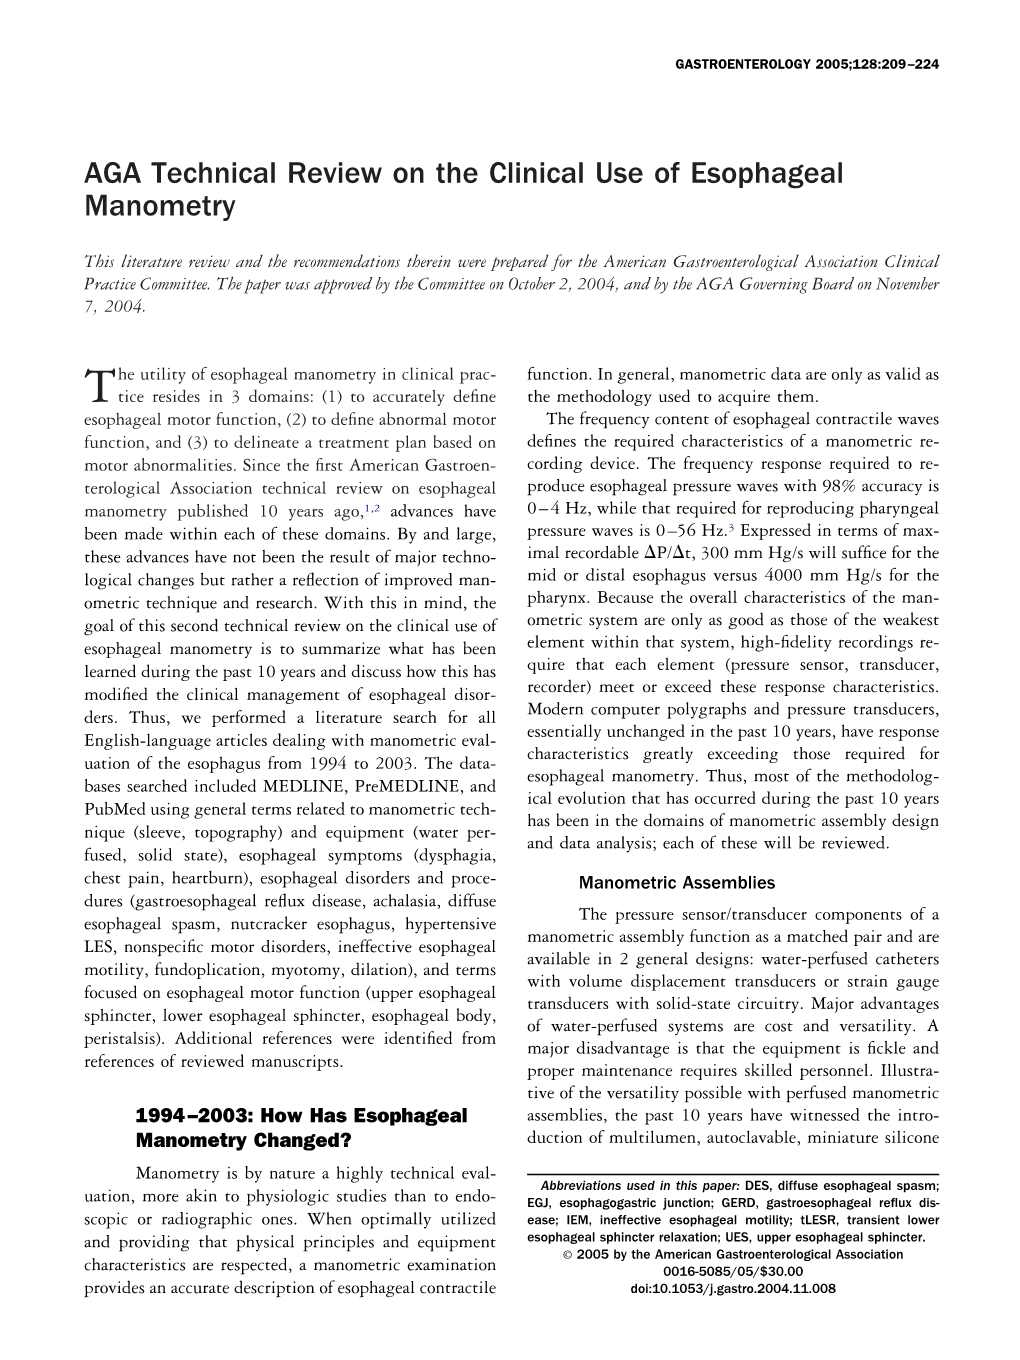 AGA Technical Review on the Clinical Use of Esophageal Manometry